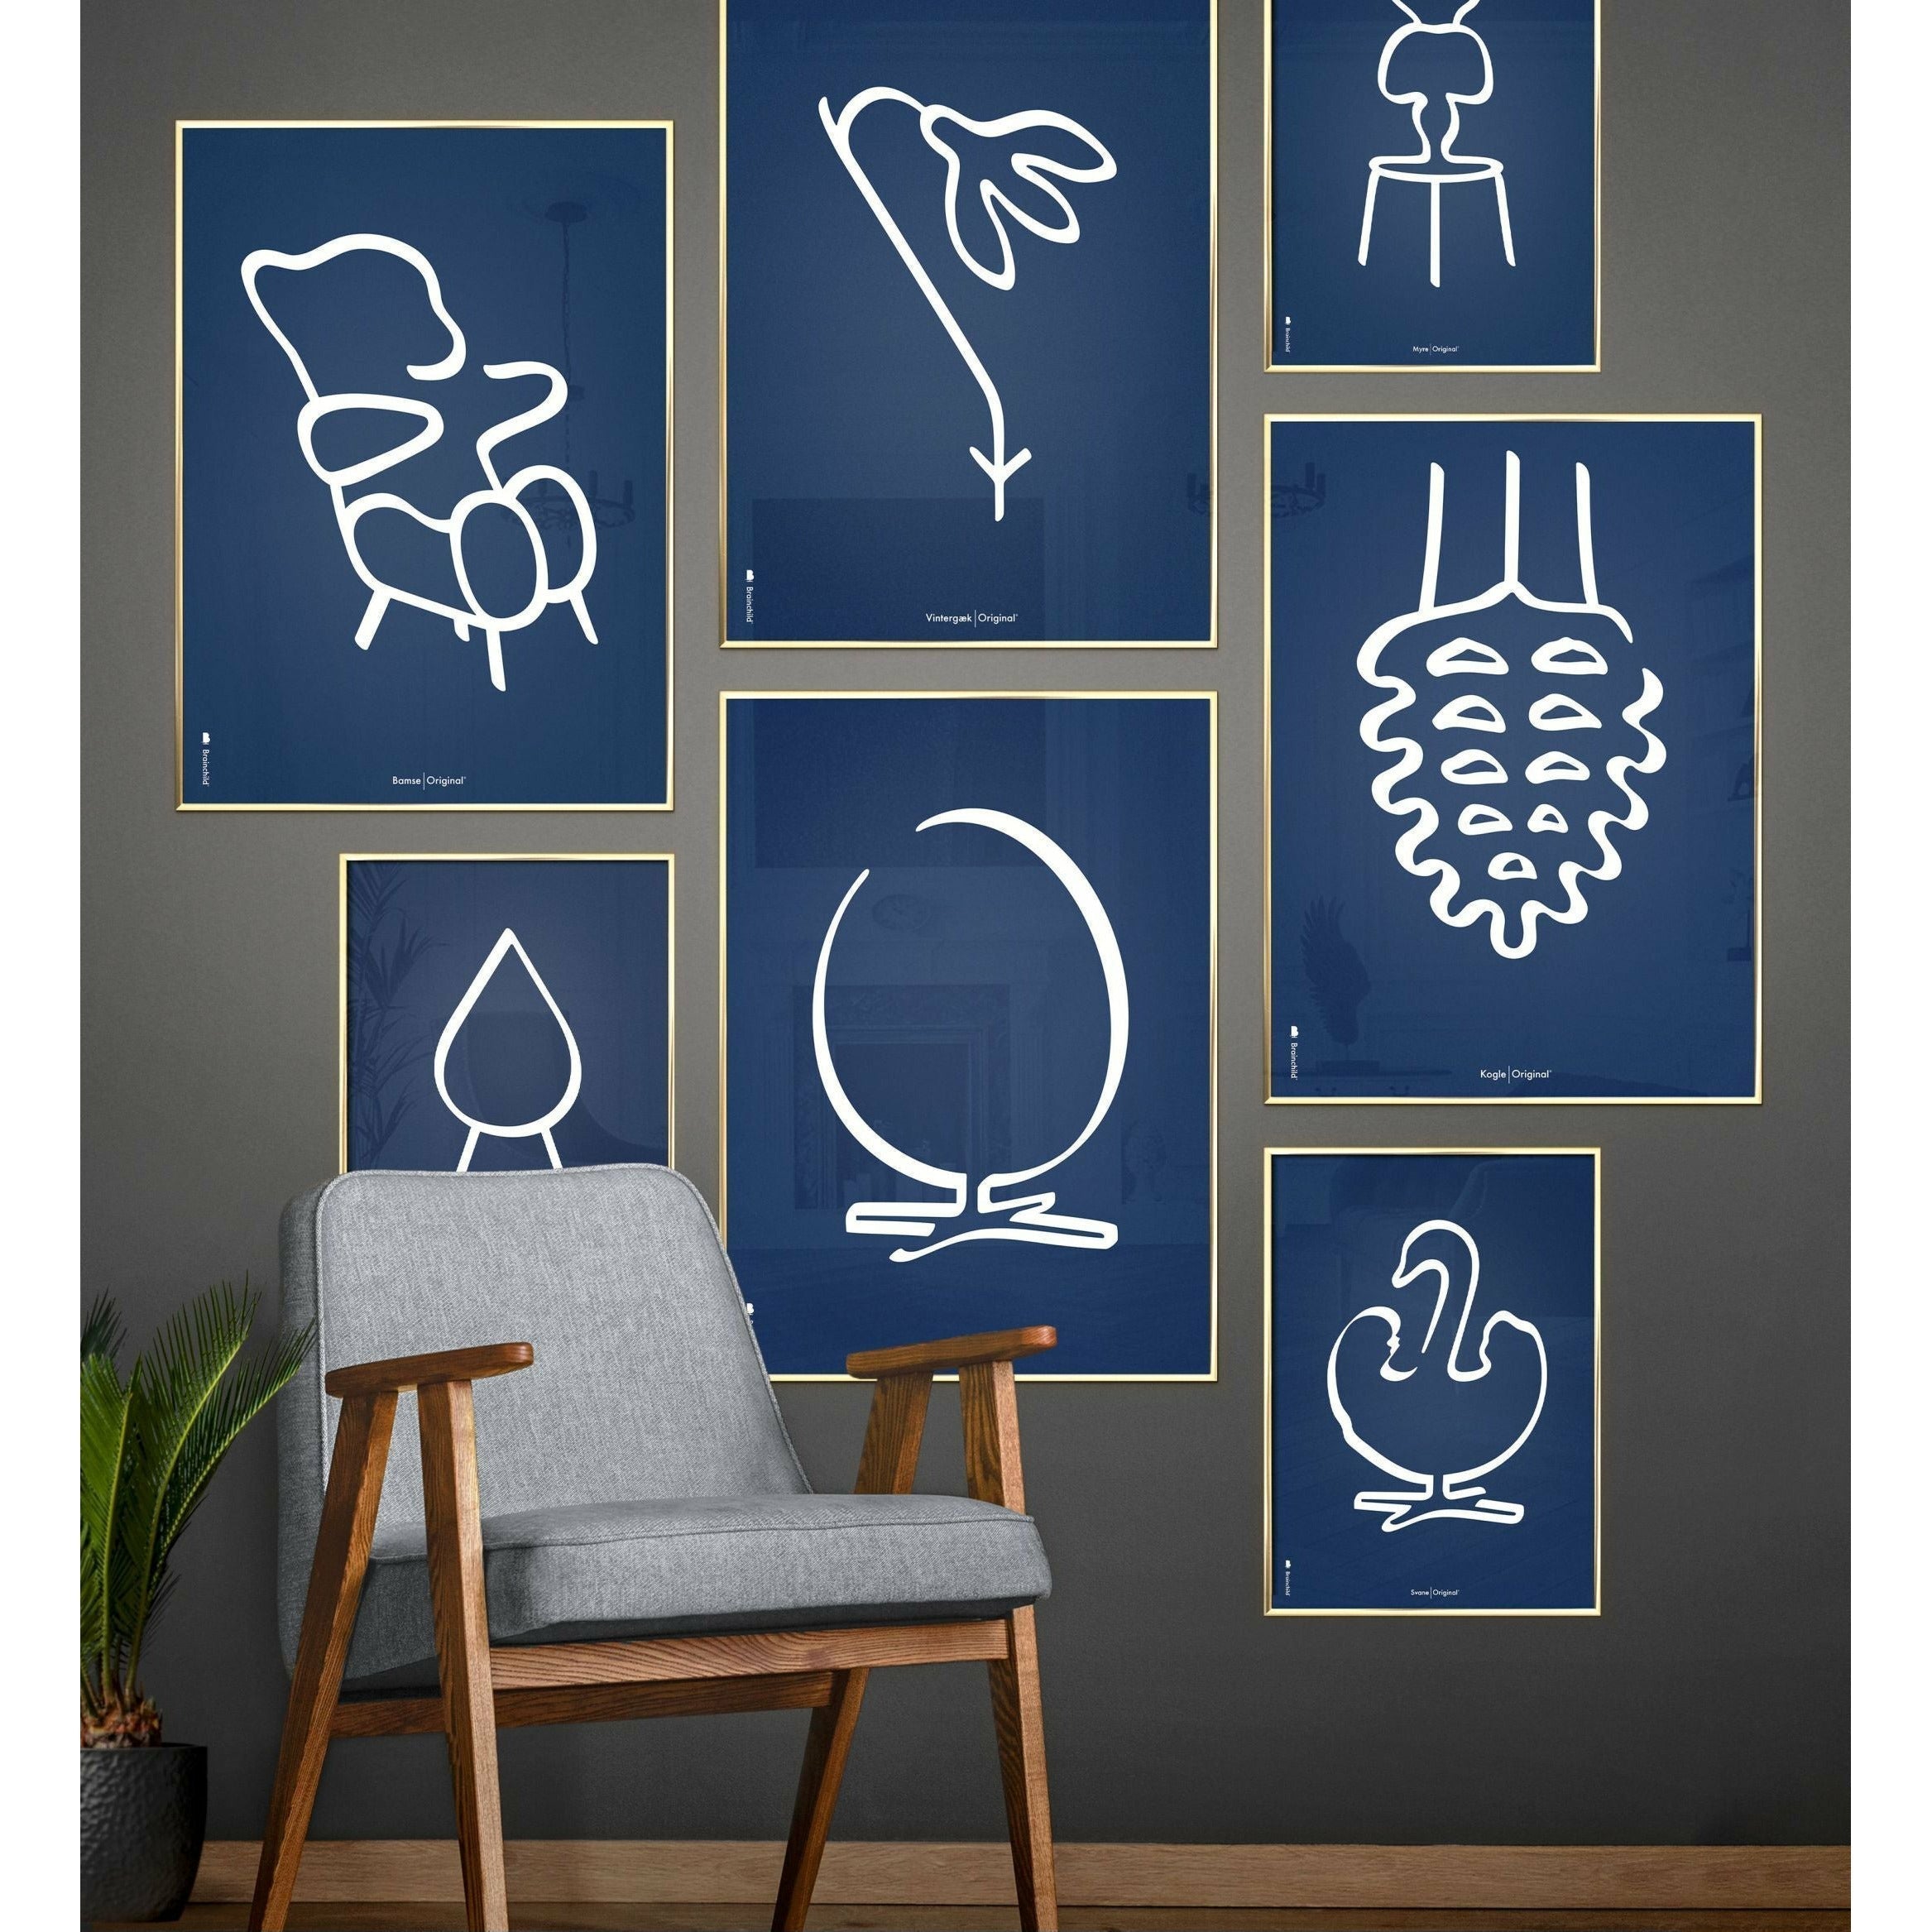 Brainchild Ant Line Poster, Frame In Black Lacquered Wood A5, Blue Background